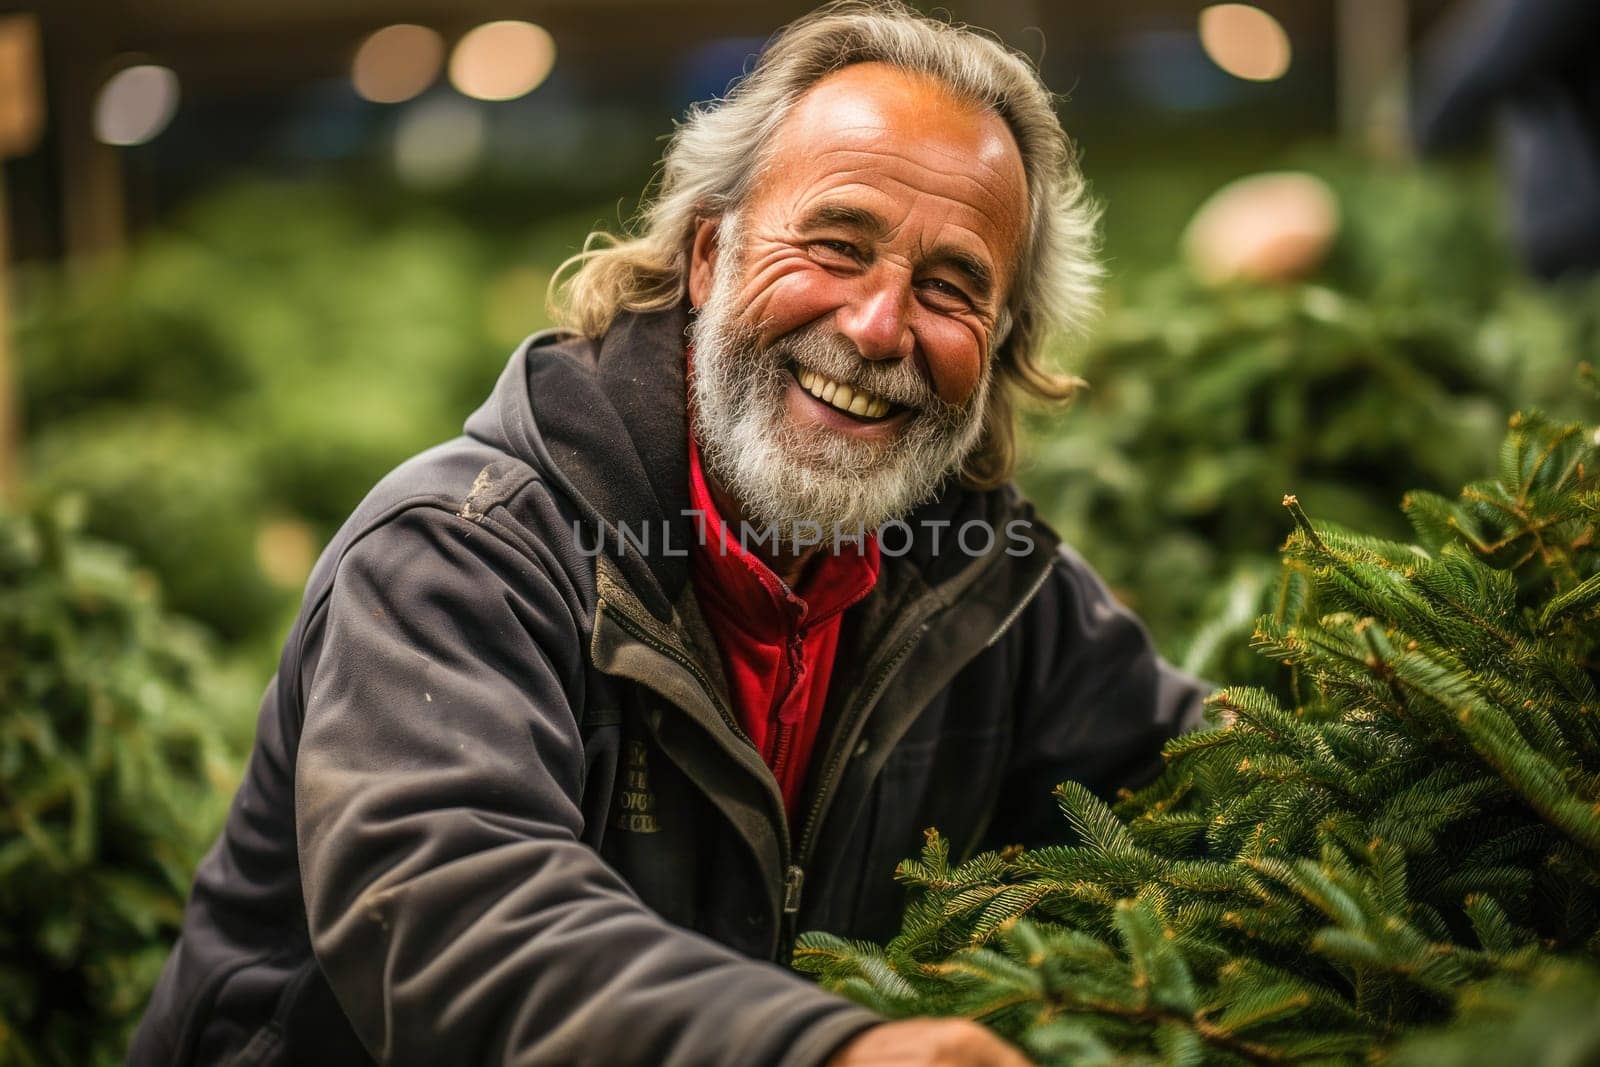 A man full of joy carefully chooses the perfect Christmas tree at a lively holiday market surrounded by a cheerful holiday atmosphere and many colorful decorations.